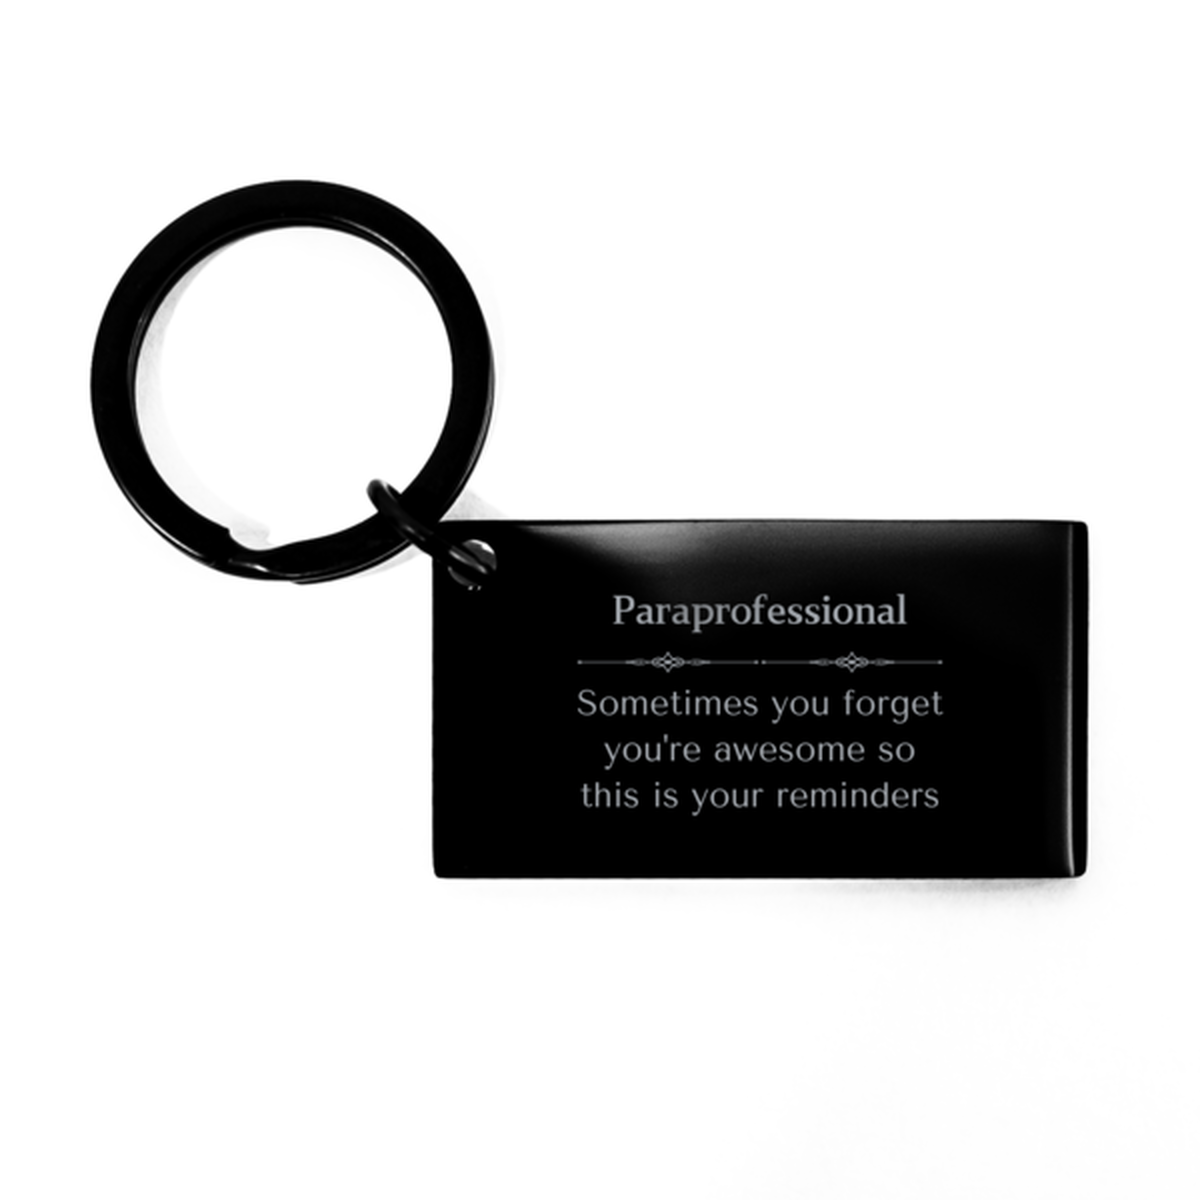 Sentimental Paraprofessional Keychain, Psychiatrist Sometimes you forget you're awesome so this is your reminders, Graduation Christmas Birthday Gifts for Paraprofessional, Men, Women, Coworkers